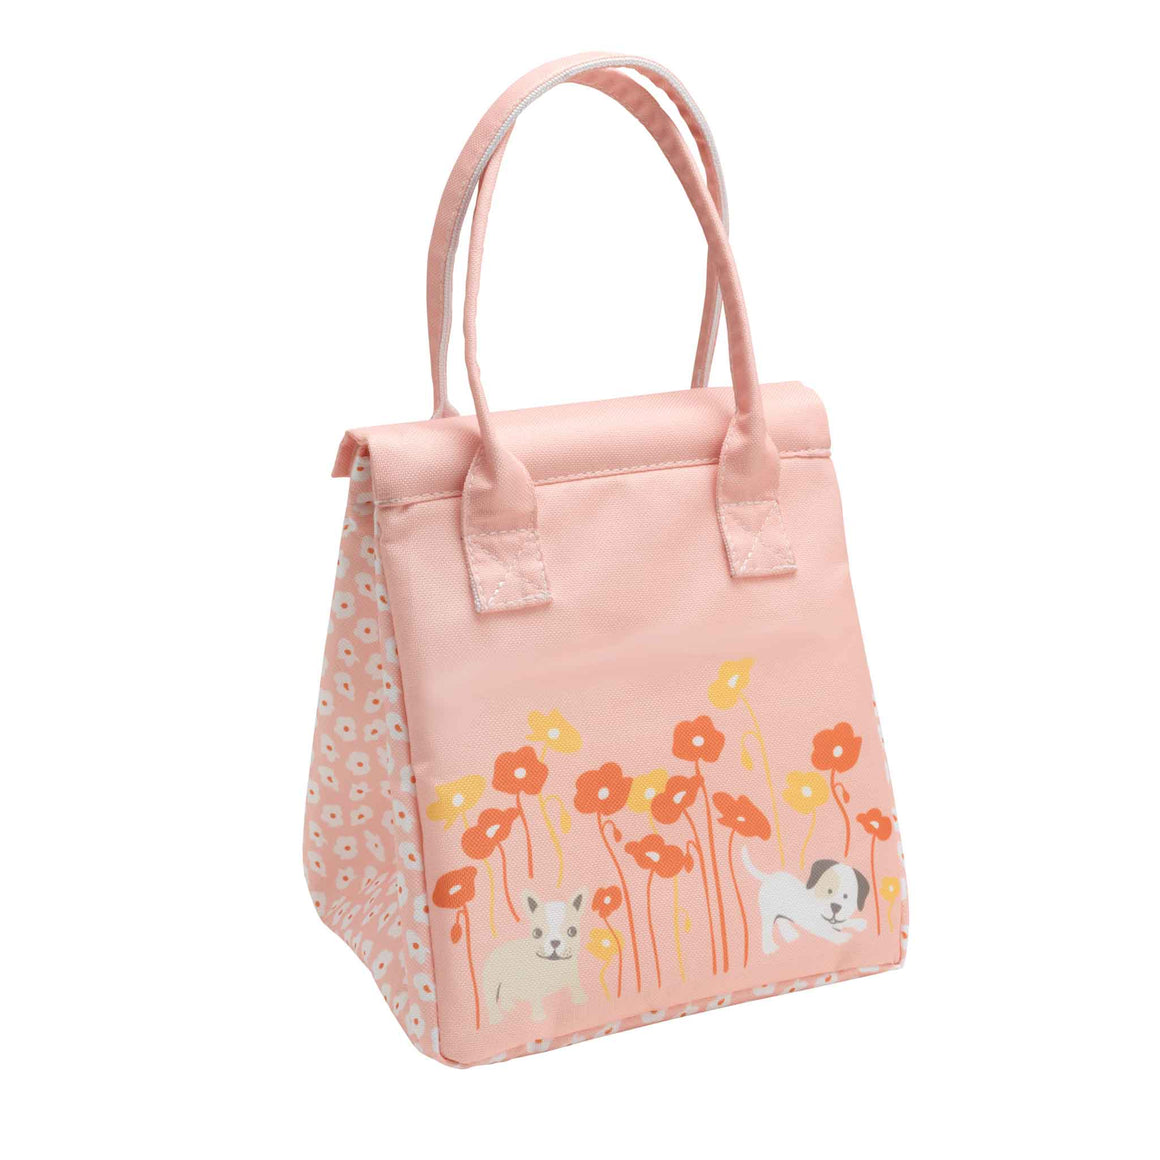 Puppies & Poppies - Grab & Go Tote